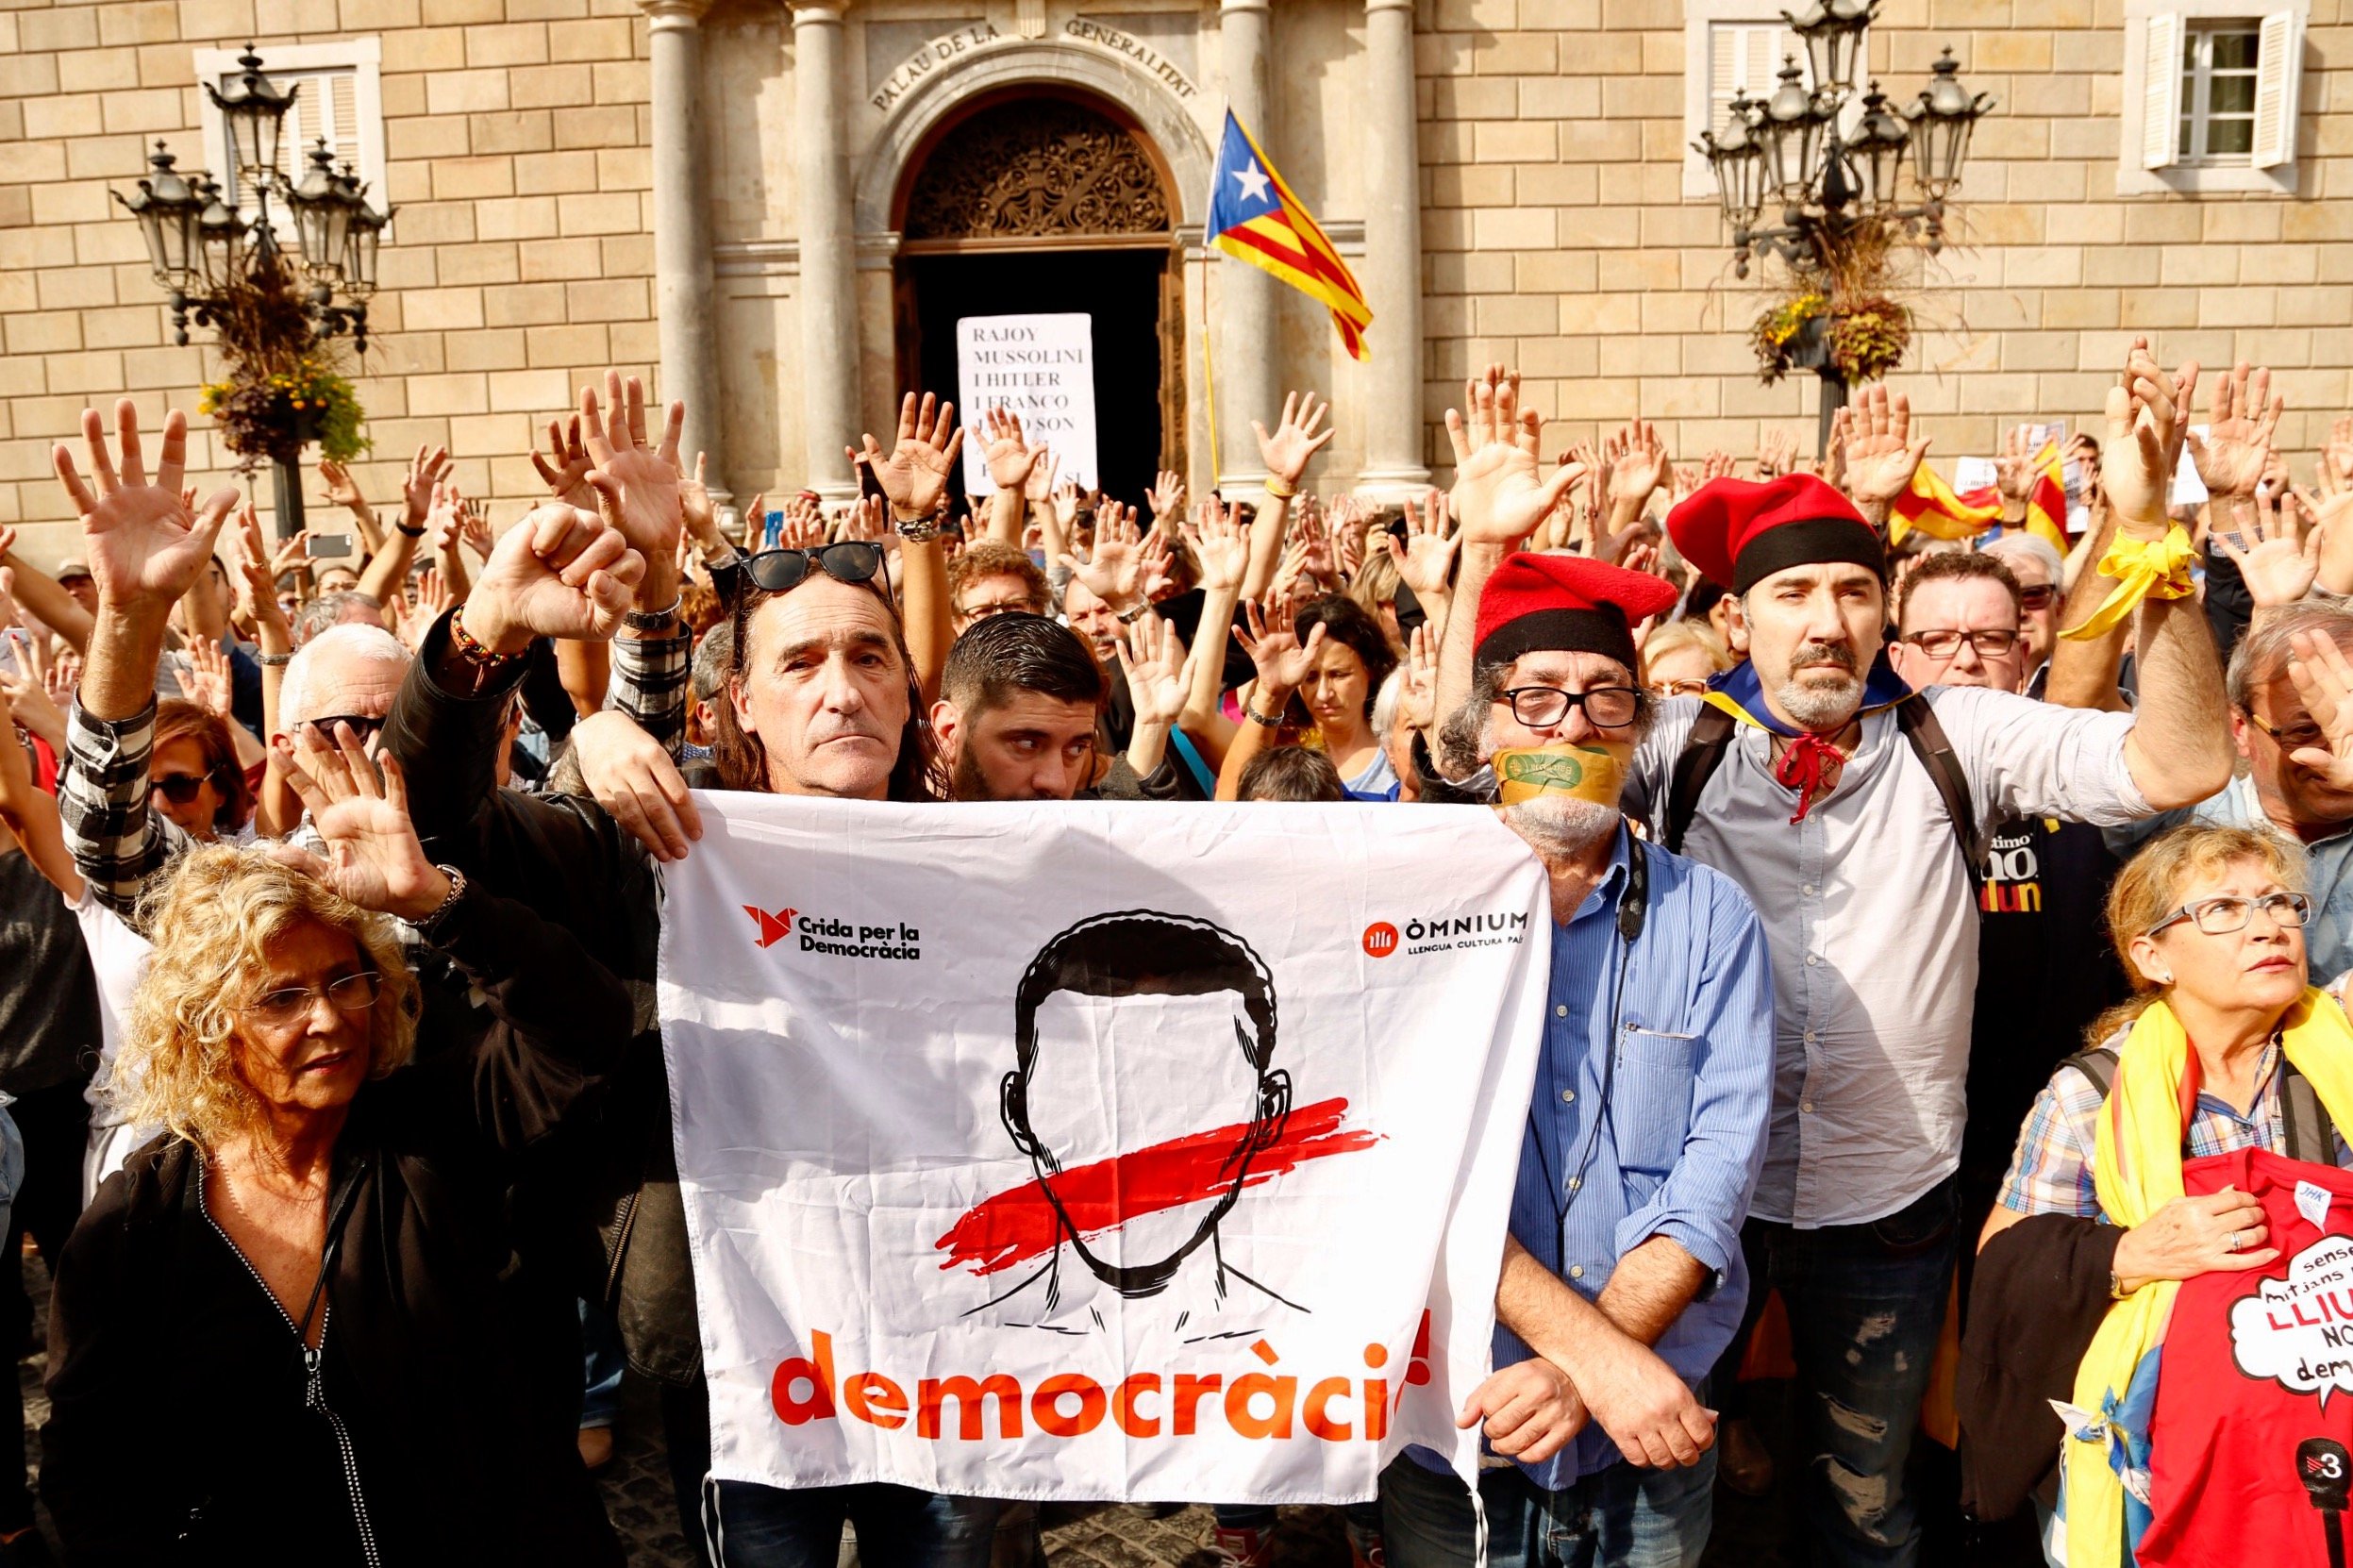 Pro-independence groups call major demonstration for November 12th